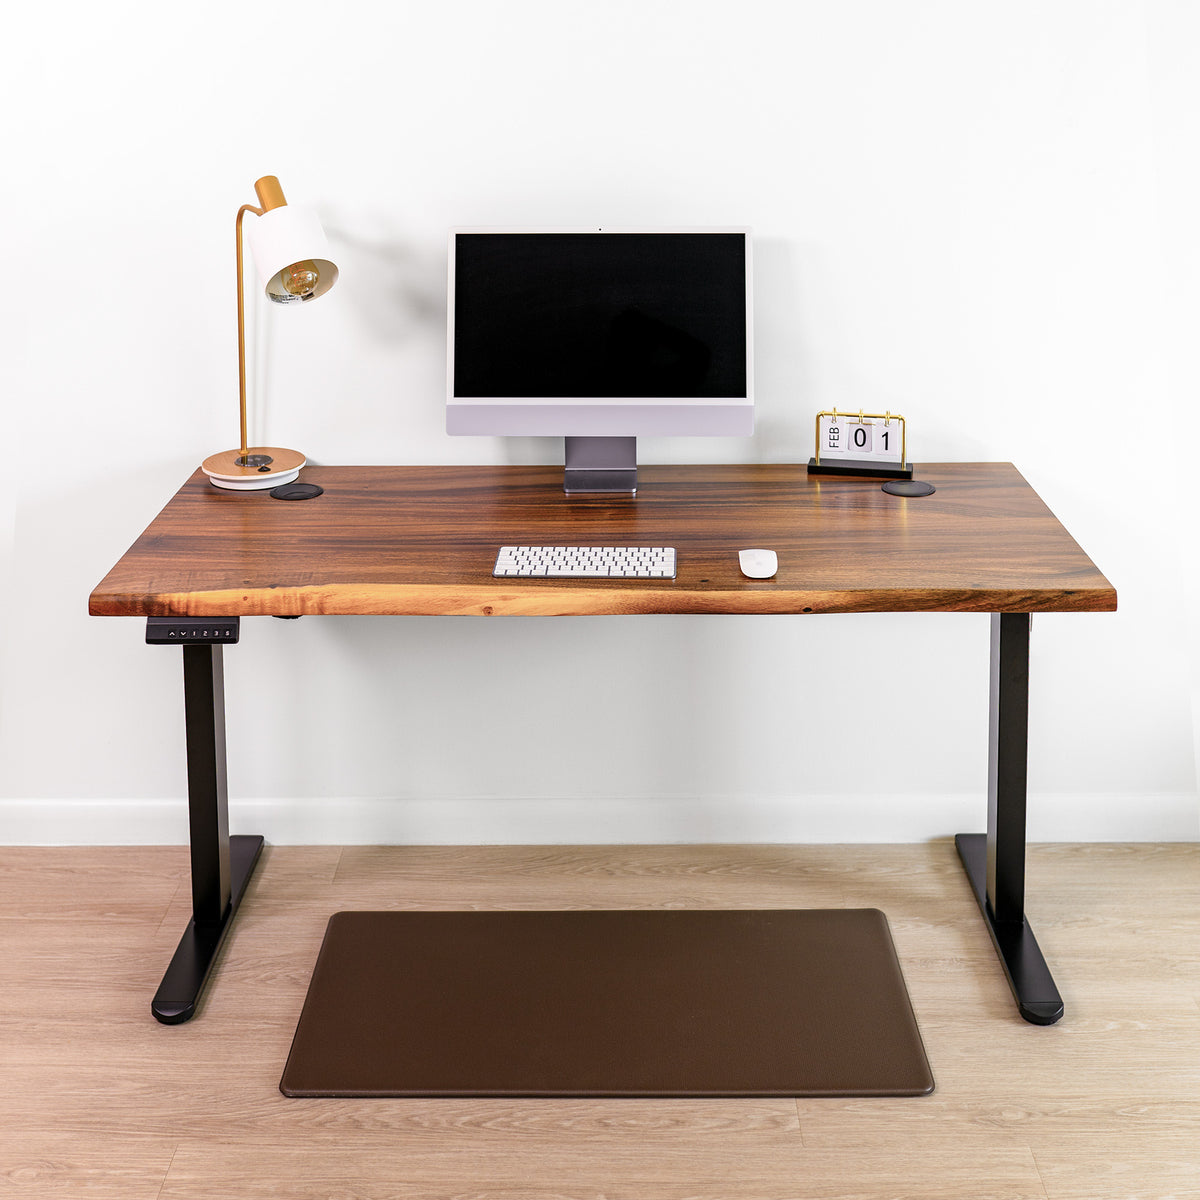 Adjustable standing desk with dual motor legs, warm brown walnut wood, natural live edge, and eco-friendly finish.